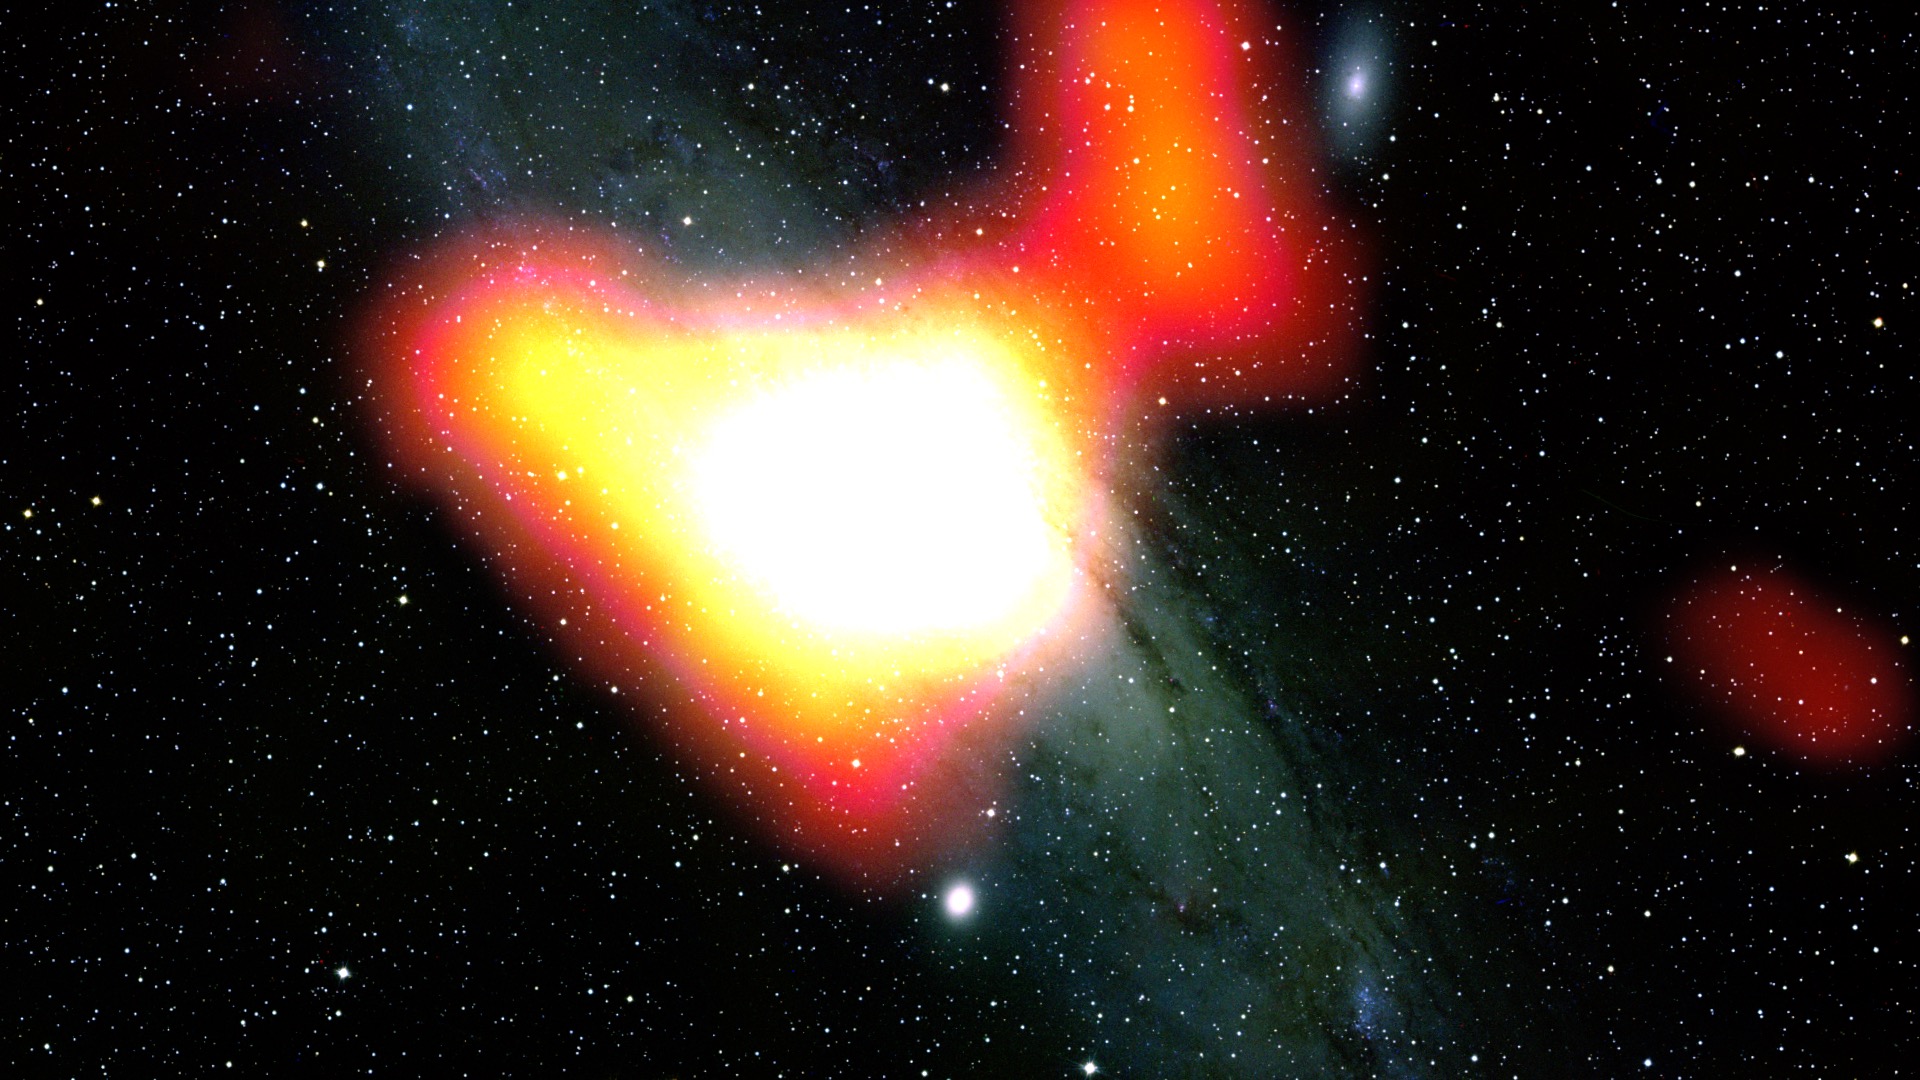 image of M31 with gamma-ray excess highlighted